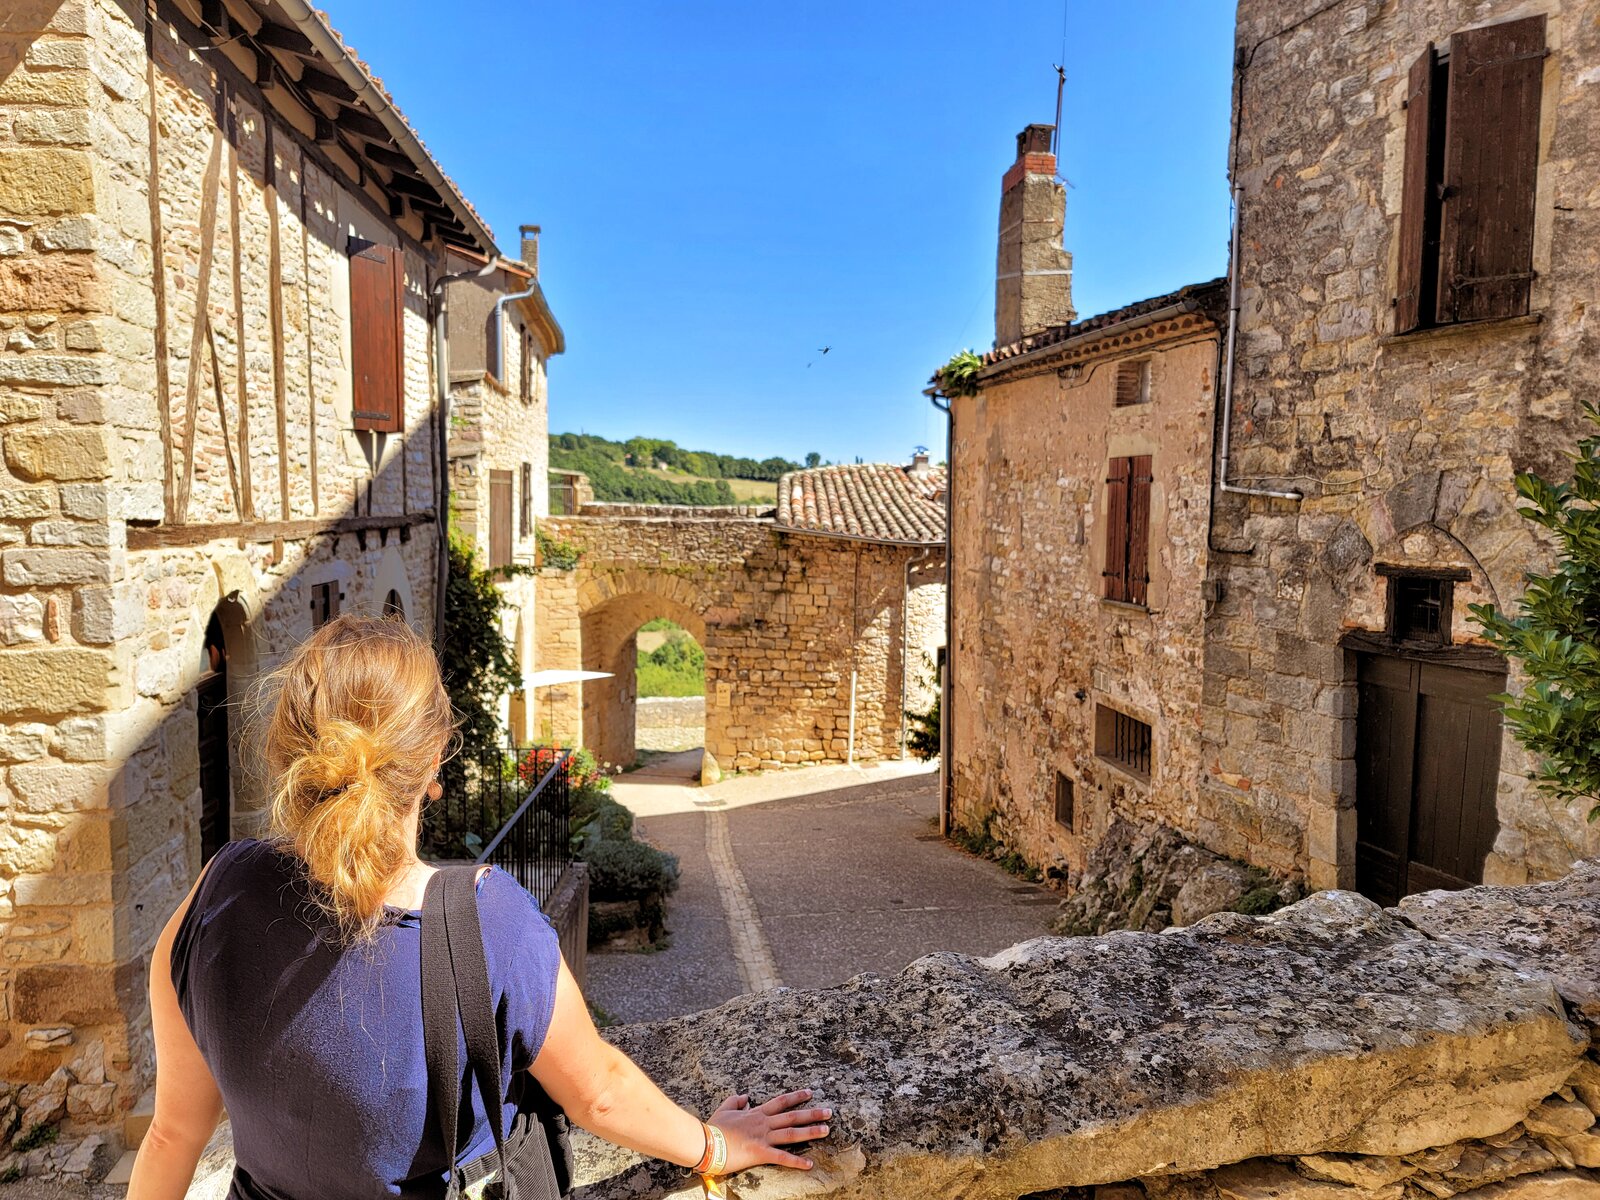 Discovering the fortified town of Puycelsi